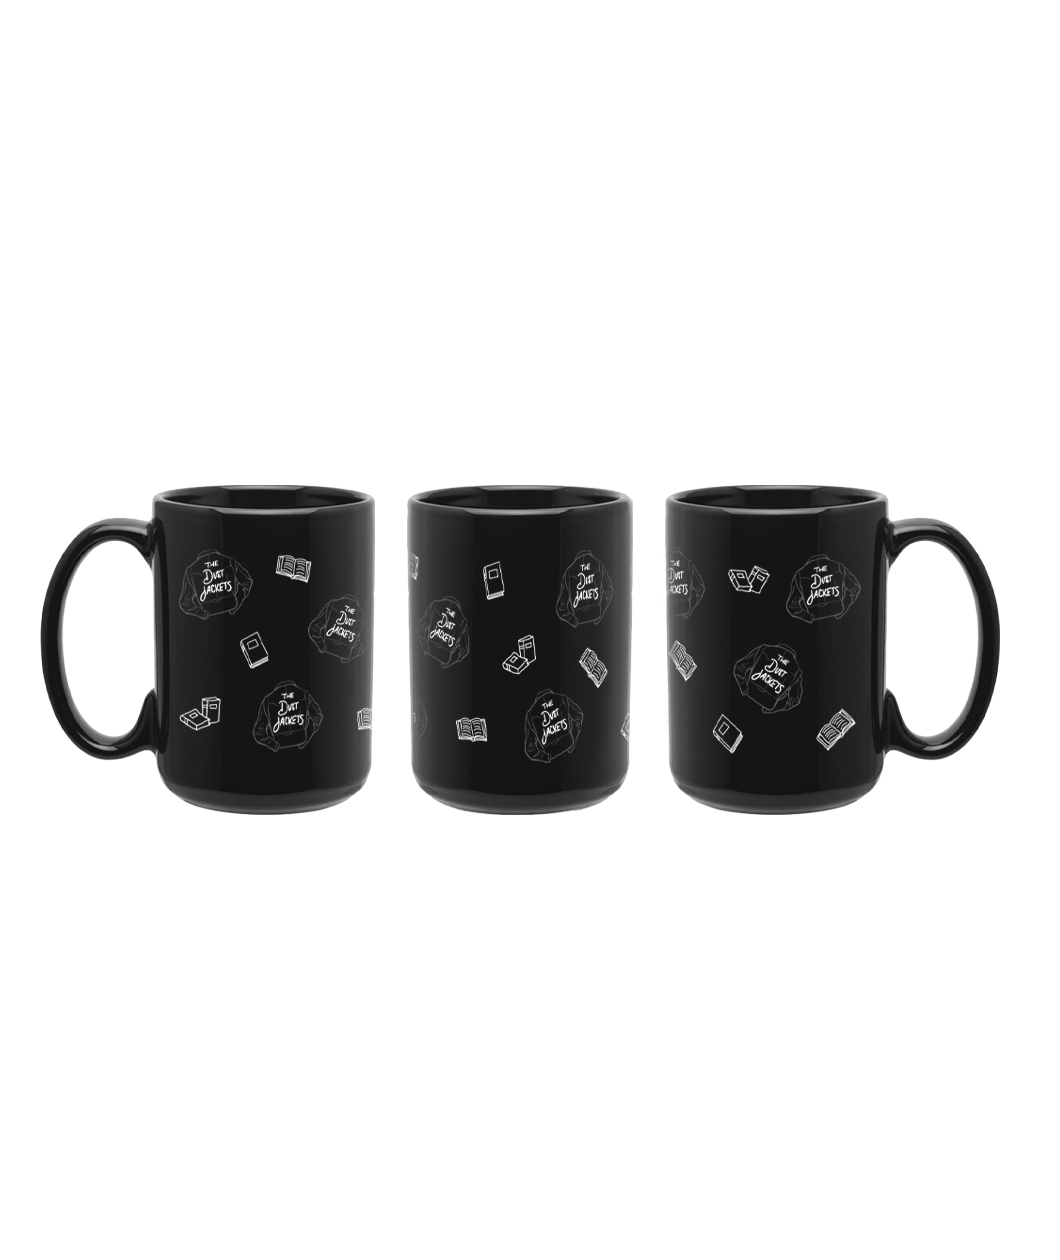 A mug turned three different ways showing repeating pattern of two closed books, one laying down and one standing up, a single closed book, an open book, and a black jacket with “The Dust Jackets” in cursive font on the jacket against a black mug - from Books Unbound